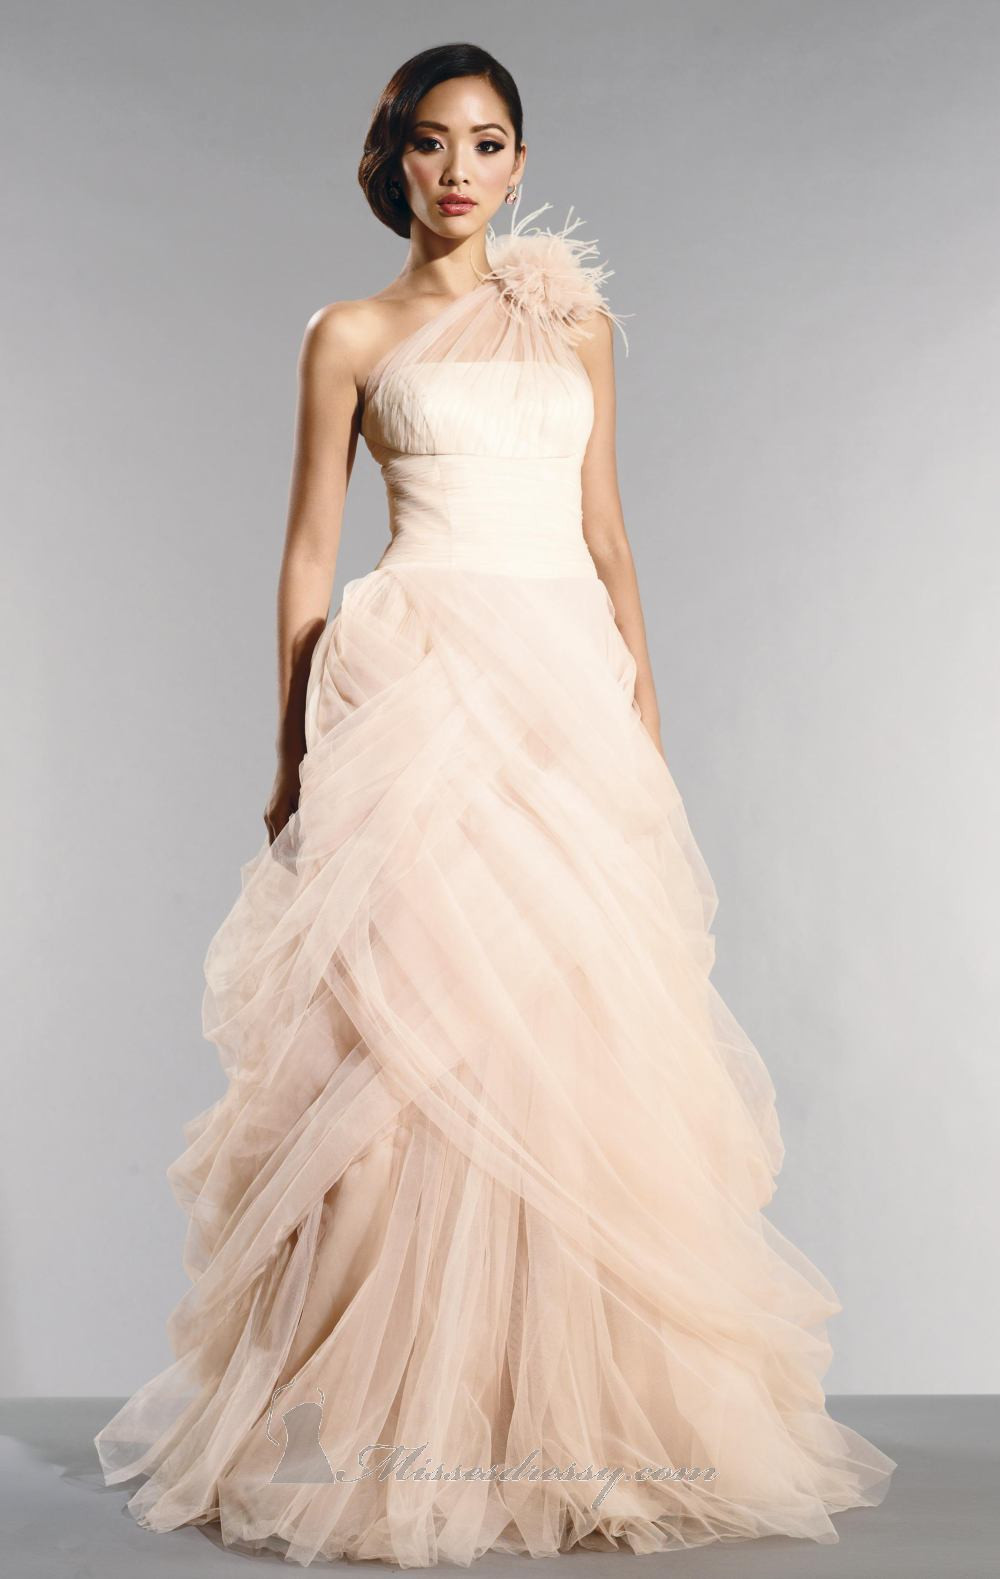 Non-traditional Wedding Gowns
 non traditional wedding dresses